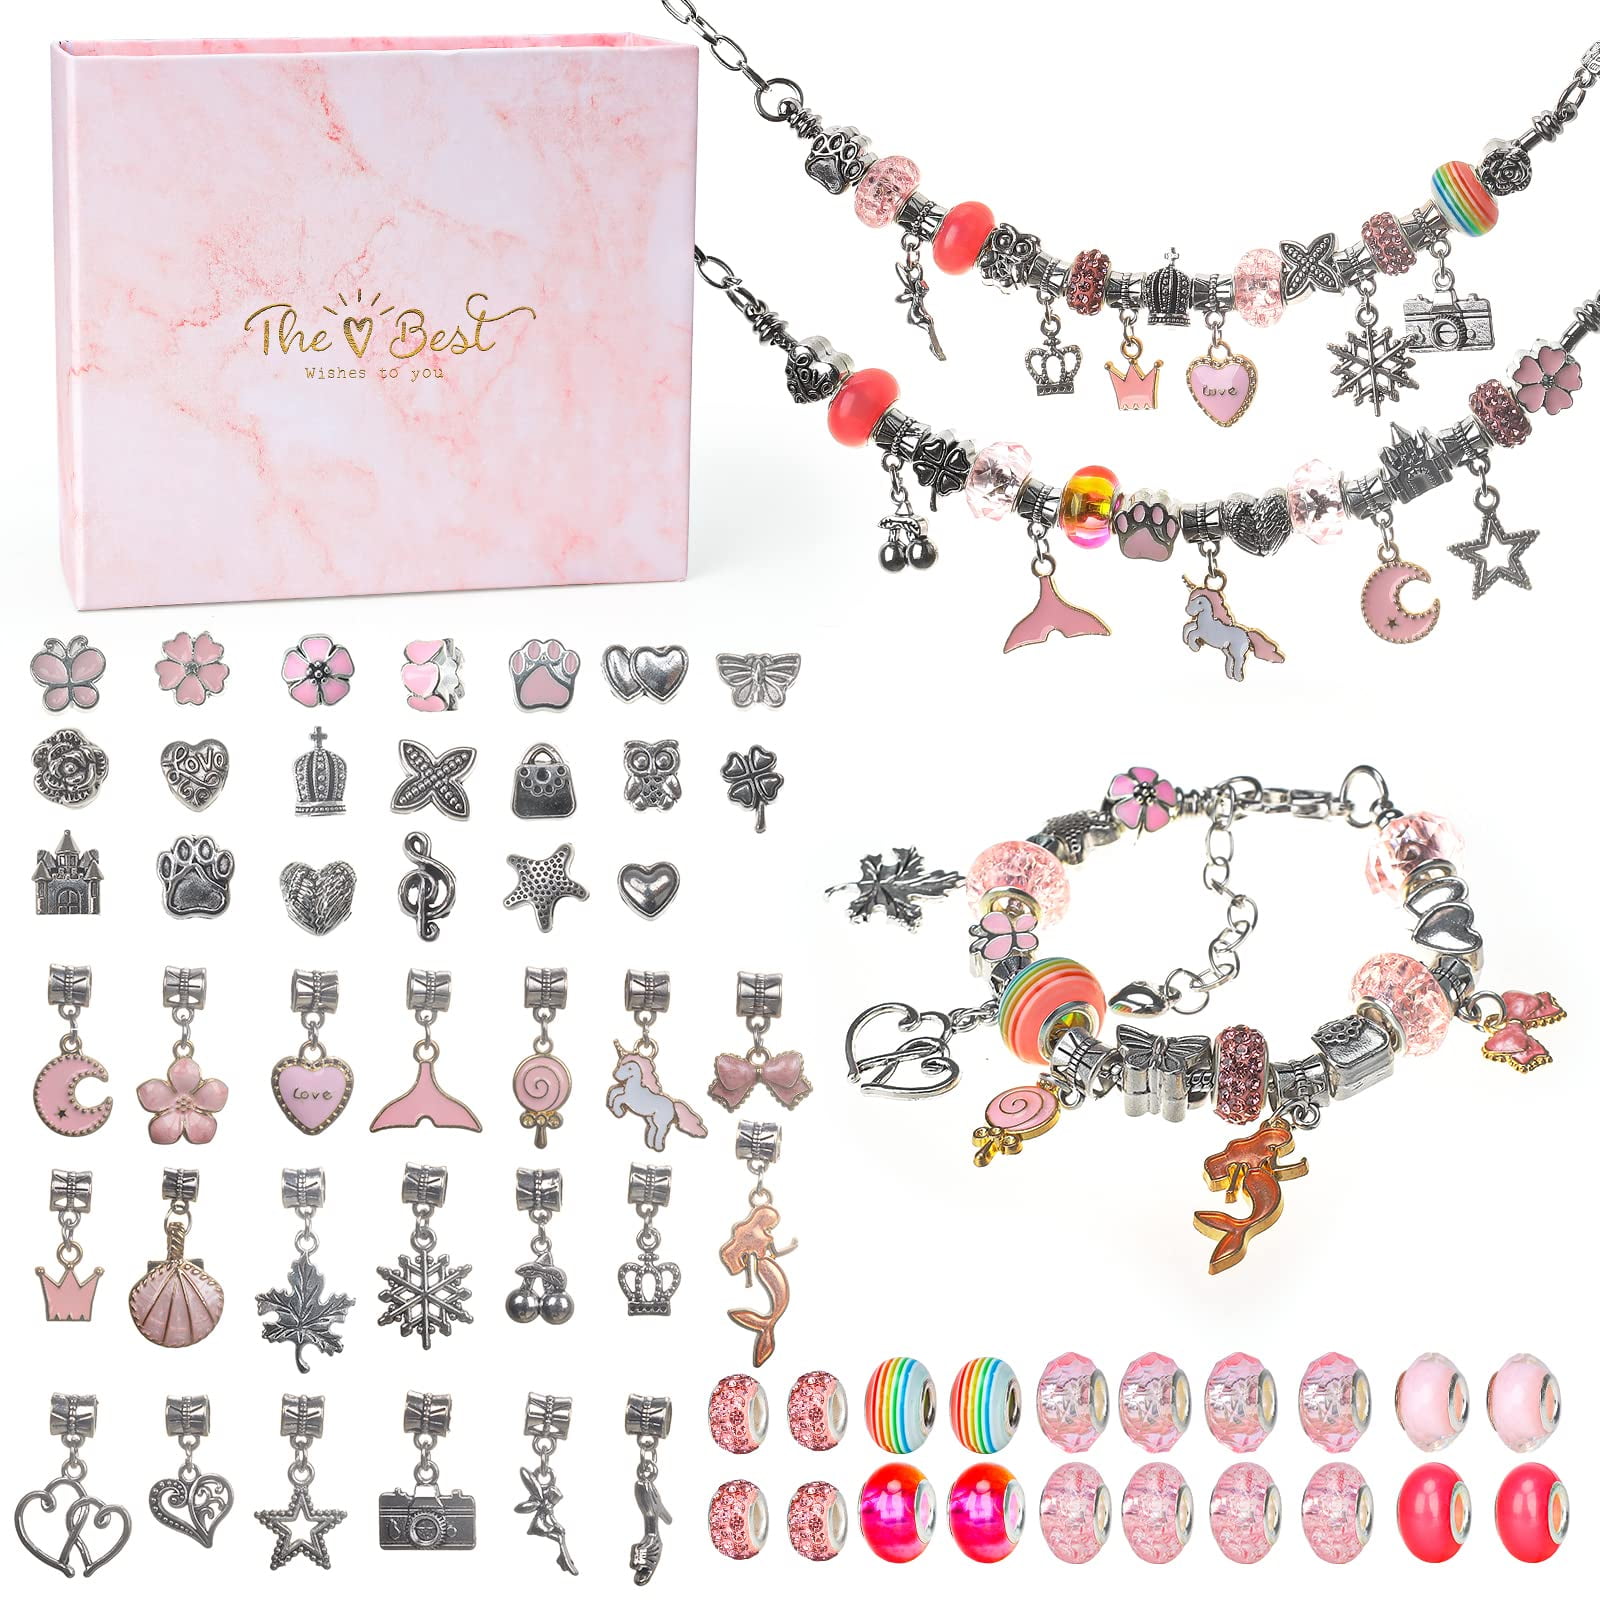 Charm Bracelet Making Kit Girls - Beads For Jewelry Making Kit, Unicorns Arts  Crafts Gifts Set For Teen Girls Age 5 6 7 8-12, With A Portable Bracele